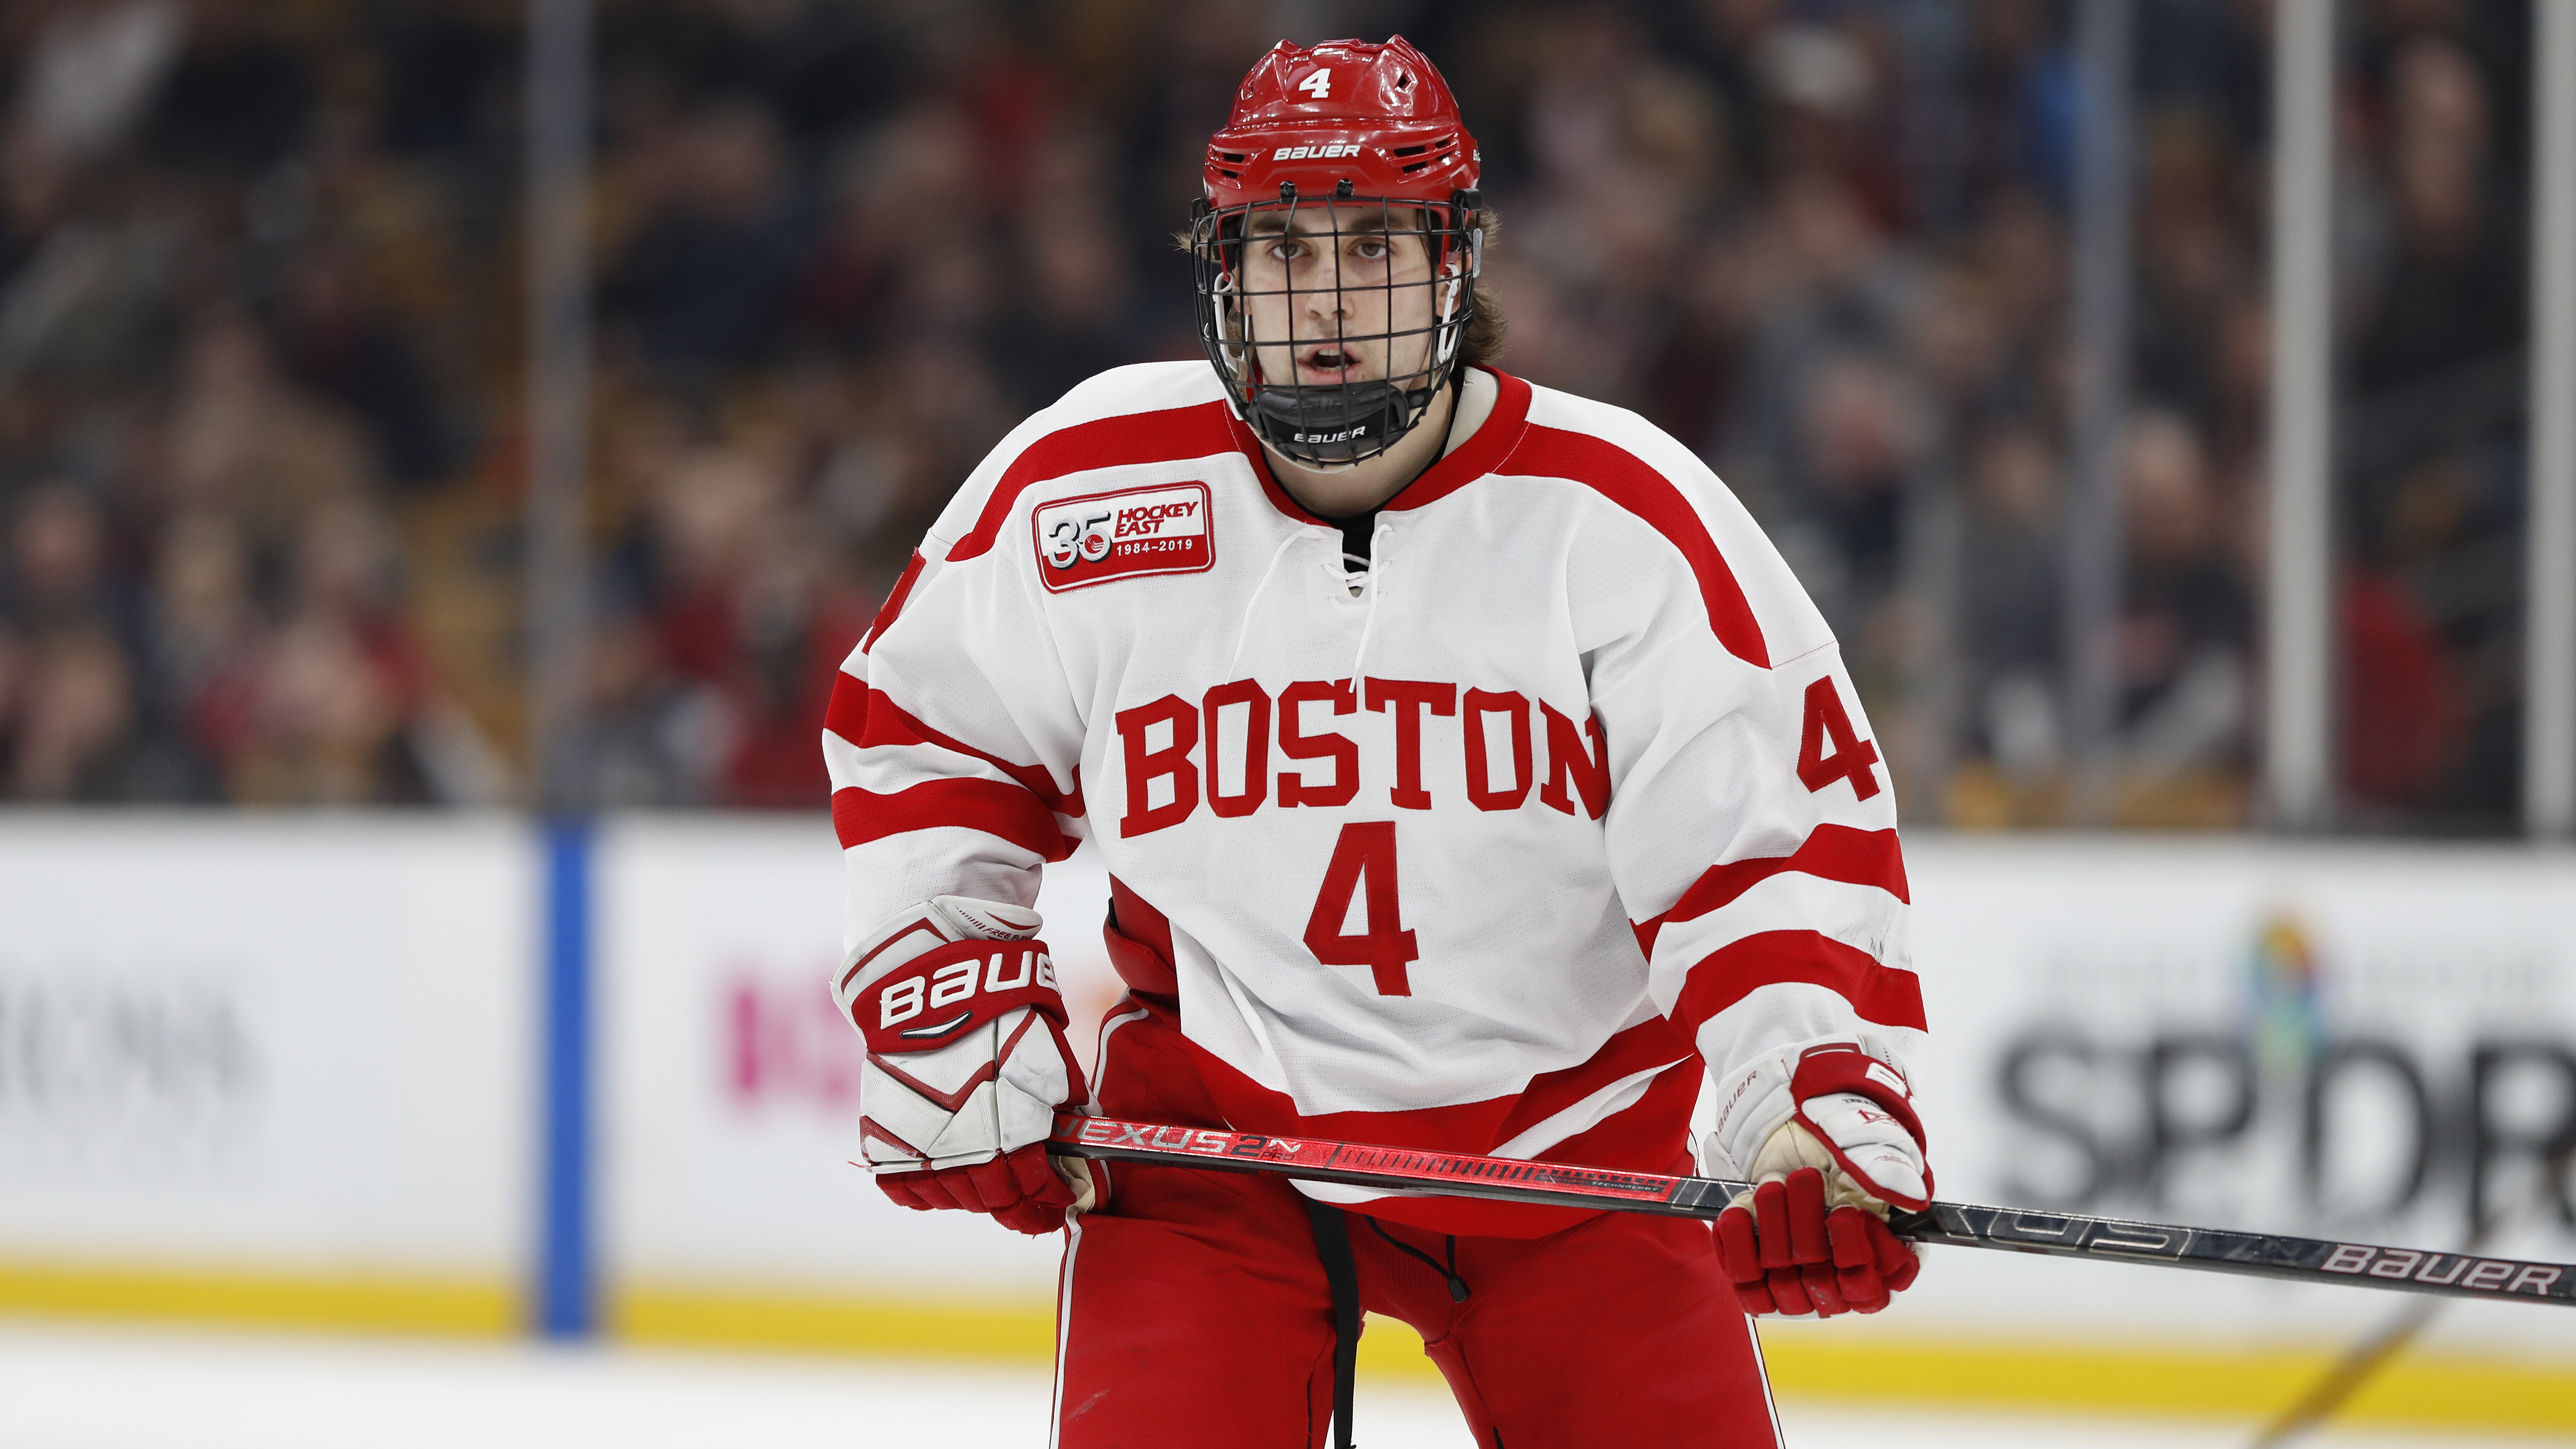 Boston University men, off the ice as a team for more than a month